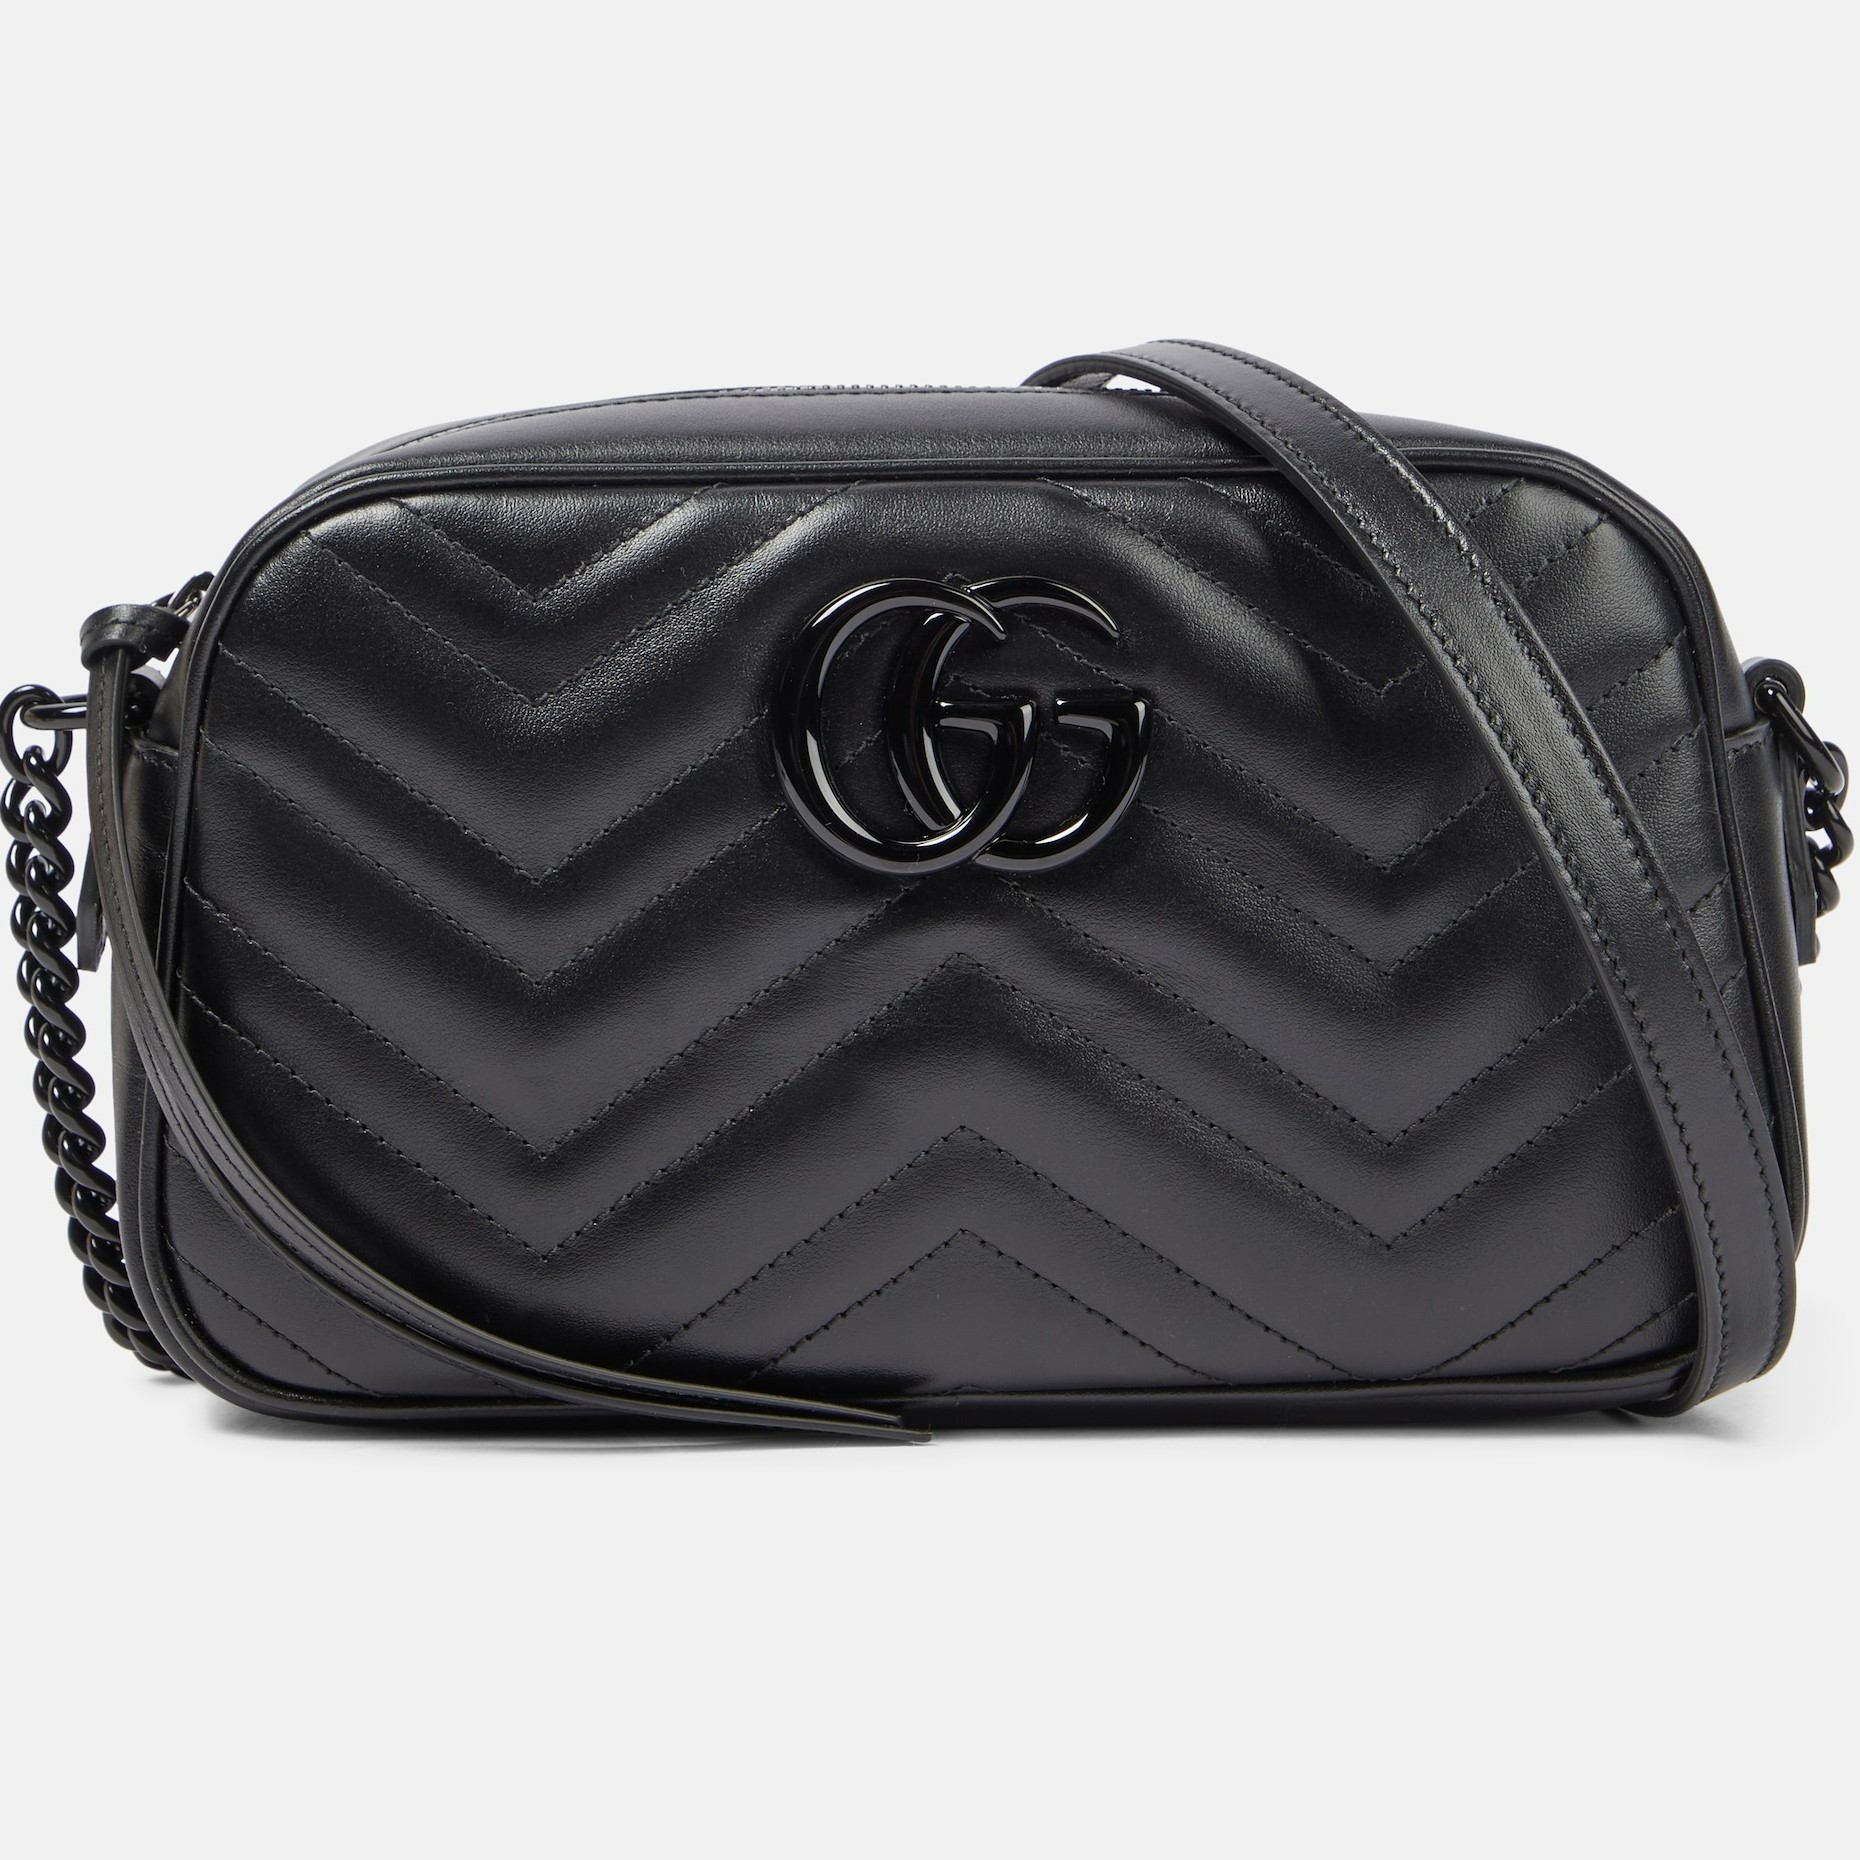 TÚI ĐEO CHÉO NỮ GUCCI GG MARMONT MATELASSÉ CAMERA SMALL QUILTED LEATHER SHOULDER BAG 5